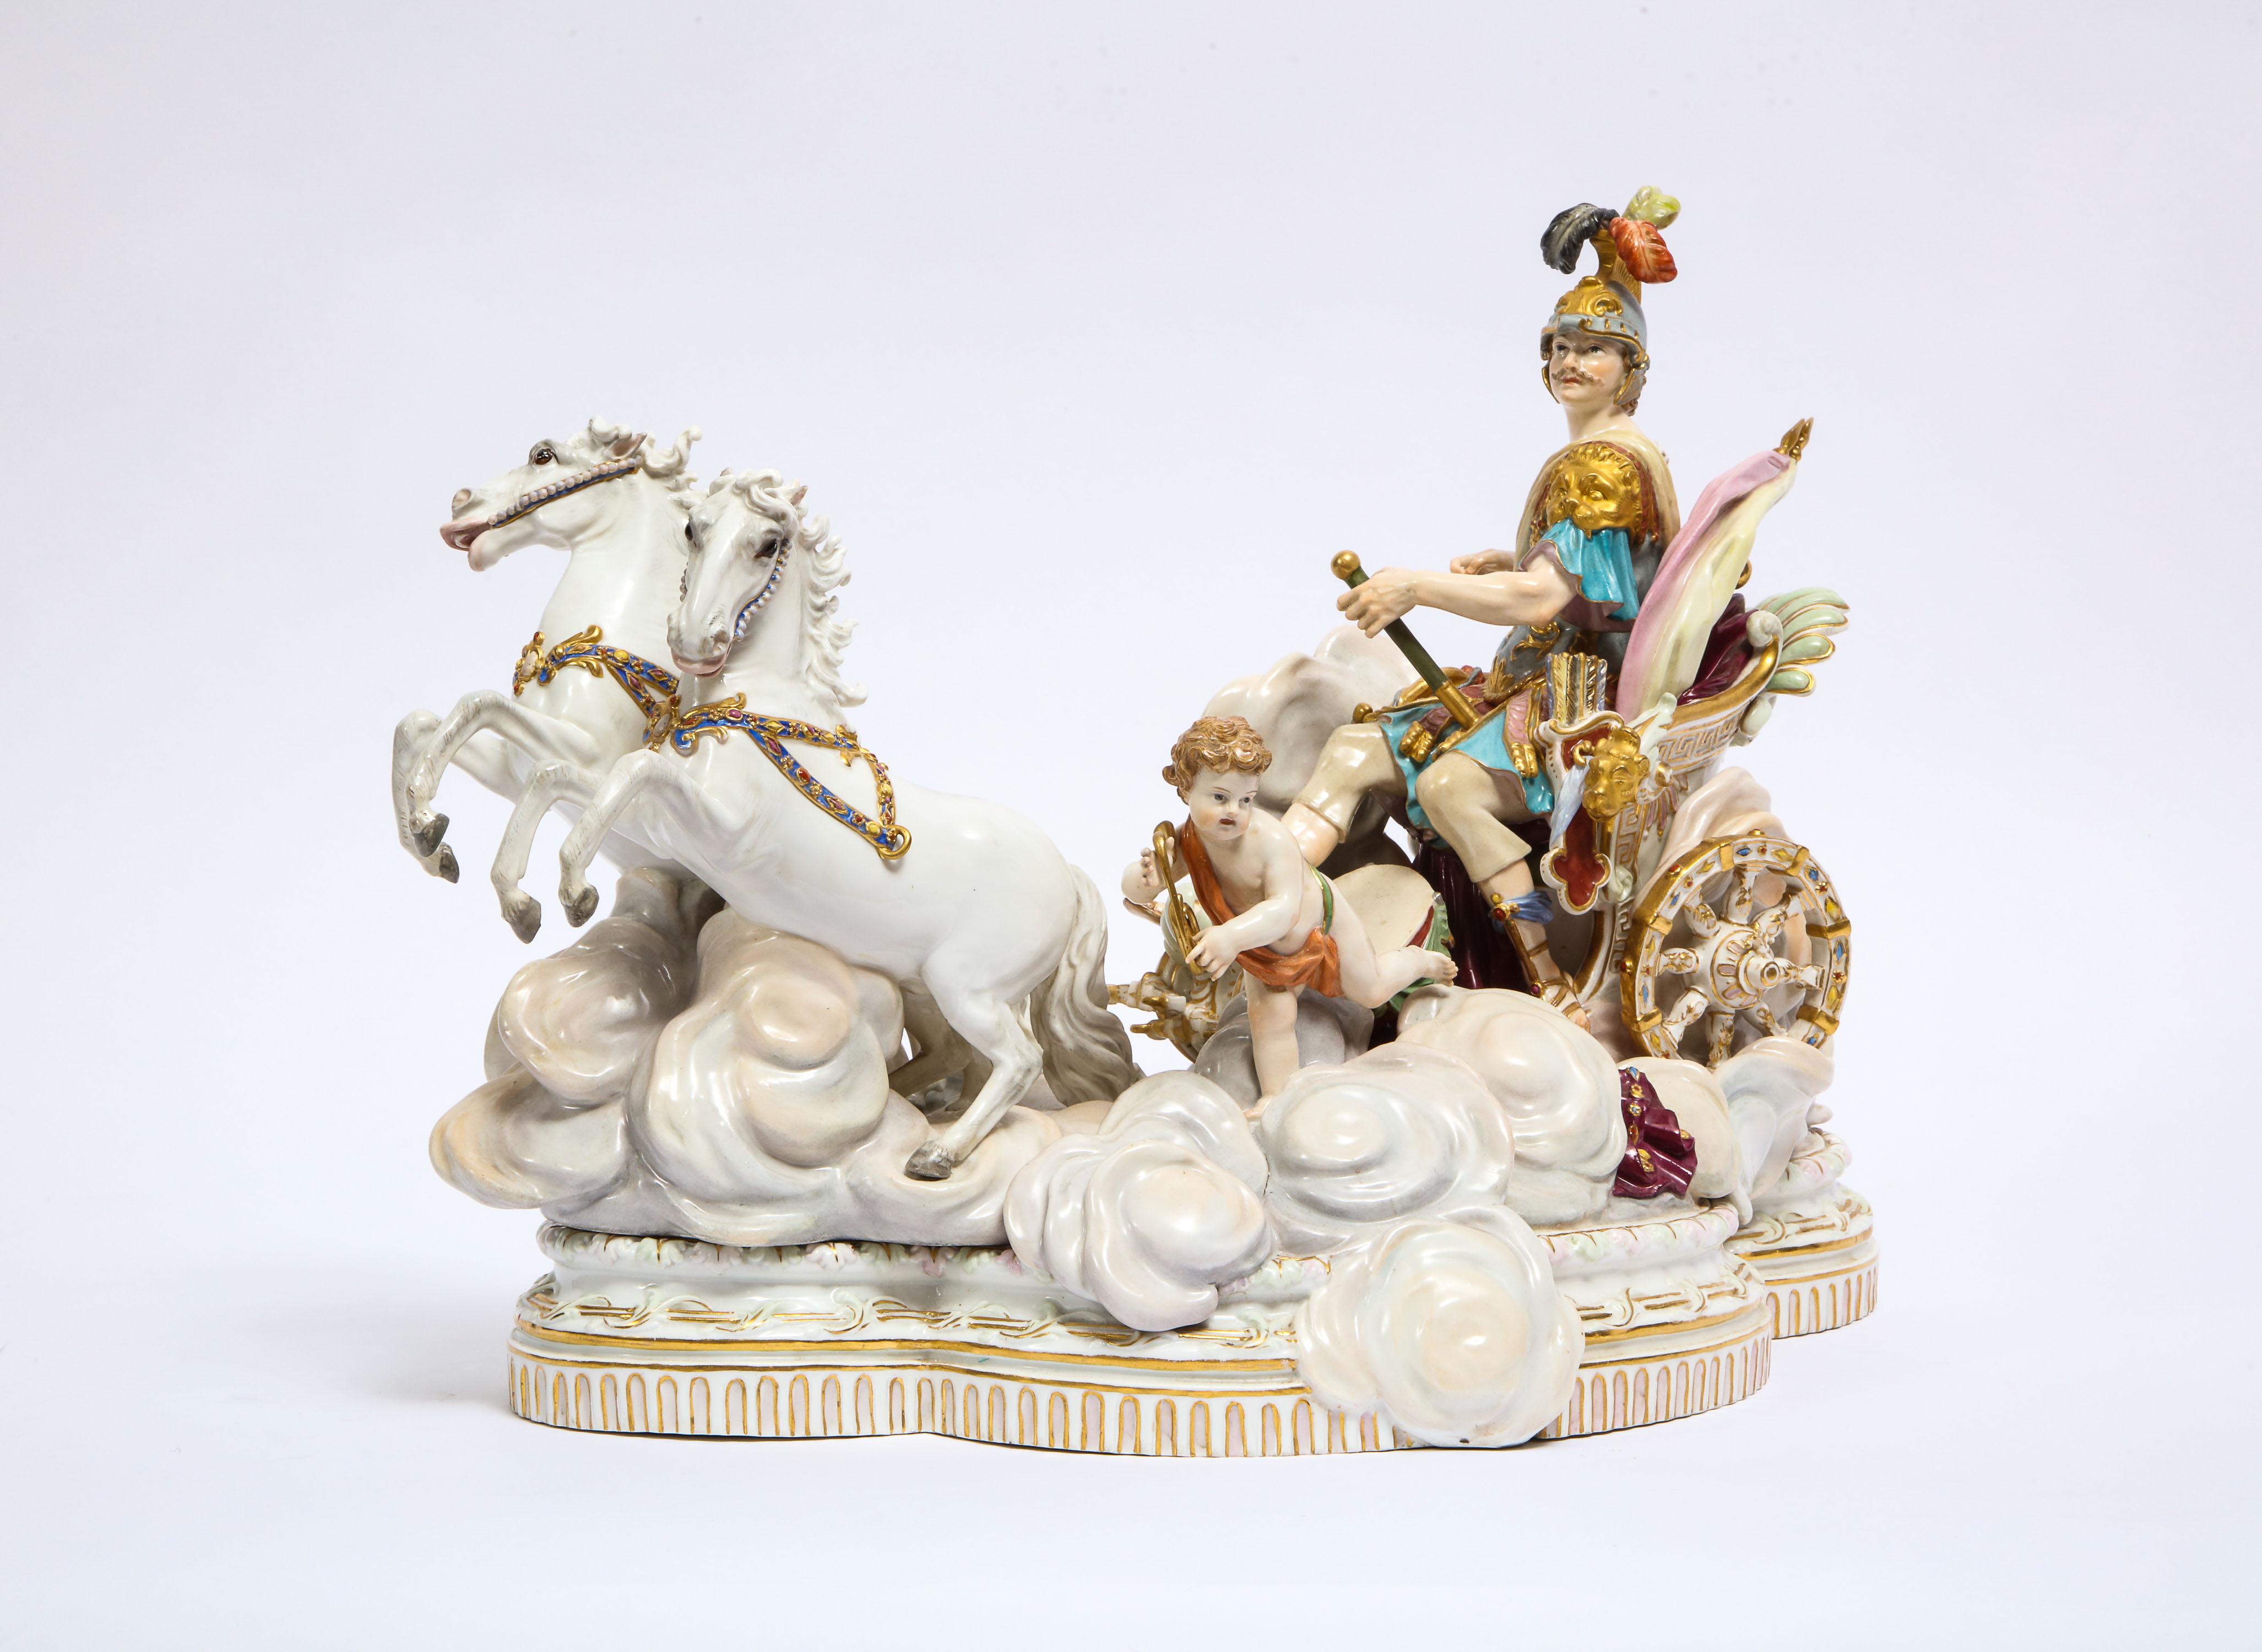 A magnificent and quite large, Baroque style, Museum Quality, Antique Meissen Porcelain Grouping of Mars, the God of War, Chariot with his Putti Servant, originally designed by Johann Joachim Kändler in 1772-1773 for Czarina Katharina, better known